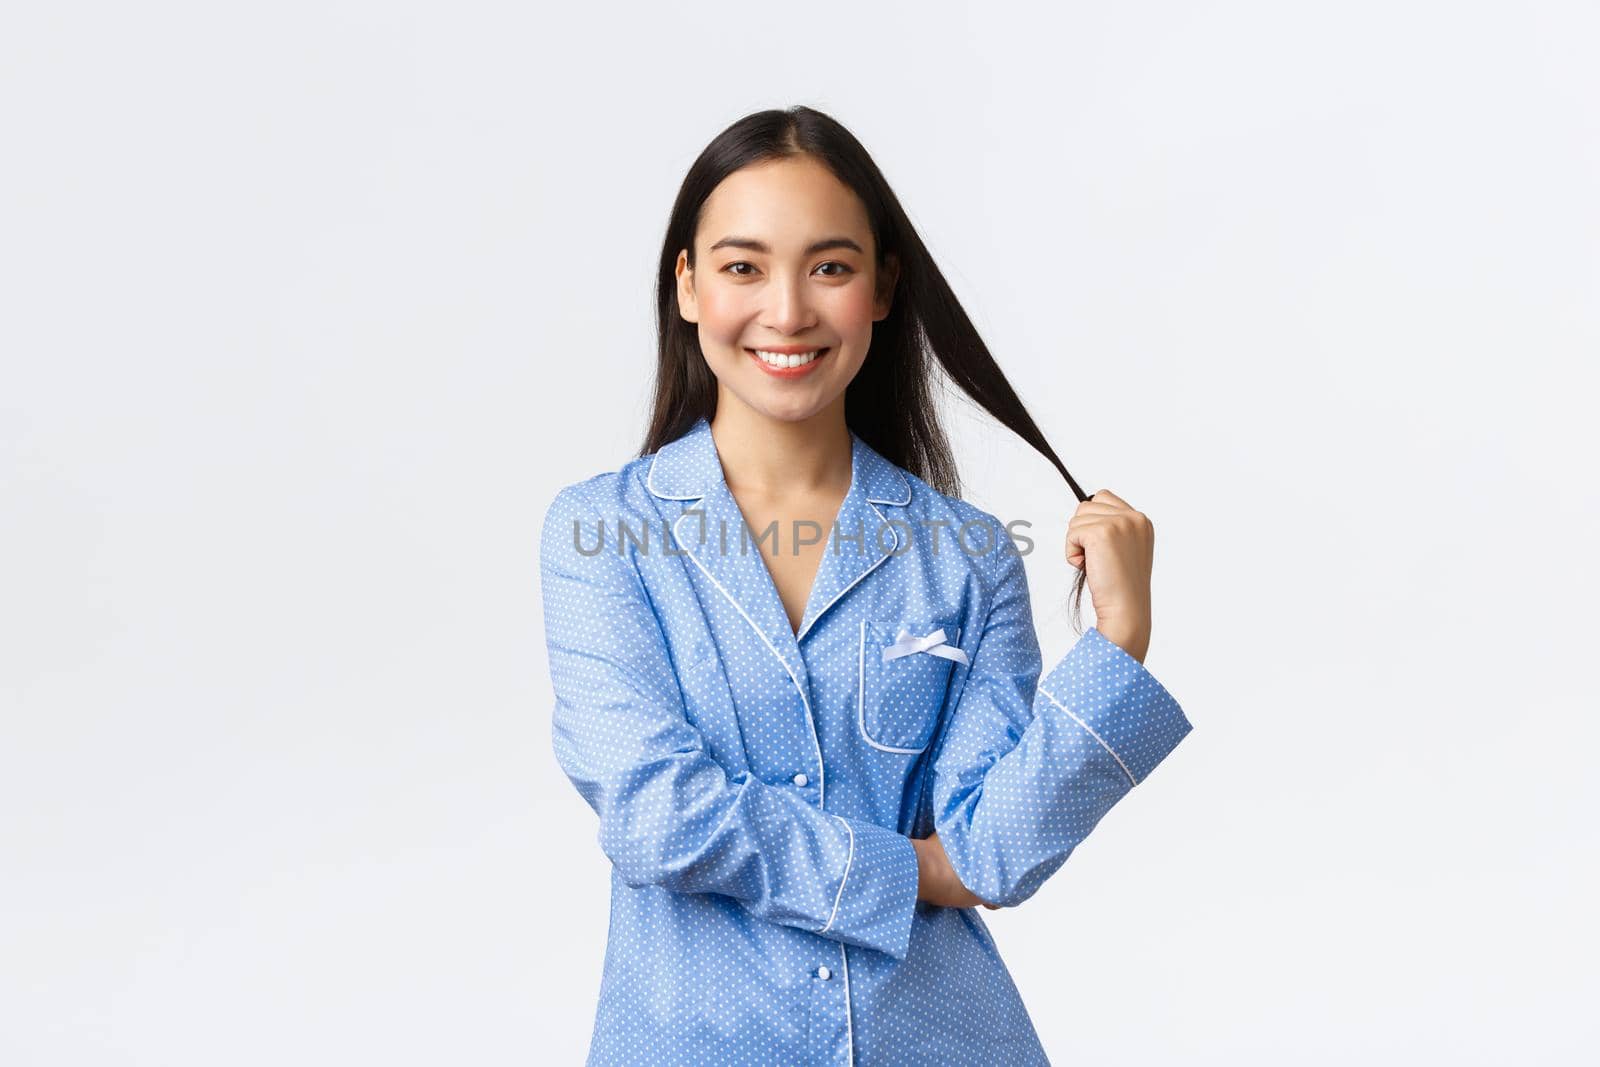 Smiling beautiful asian girl with white teeth, standing over white background in blue jammies, touching hair and looking interested, promo of skincare or haircare products.